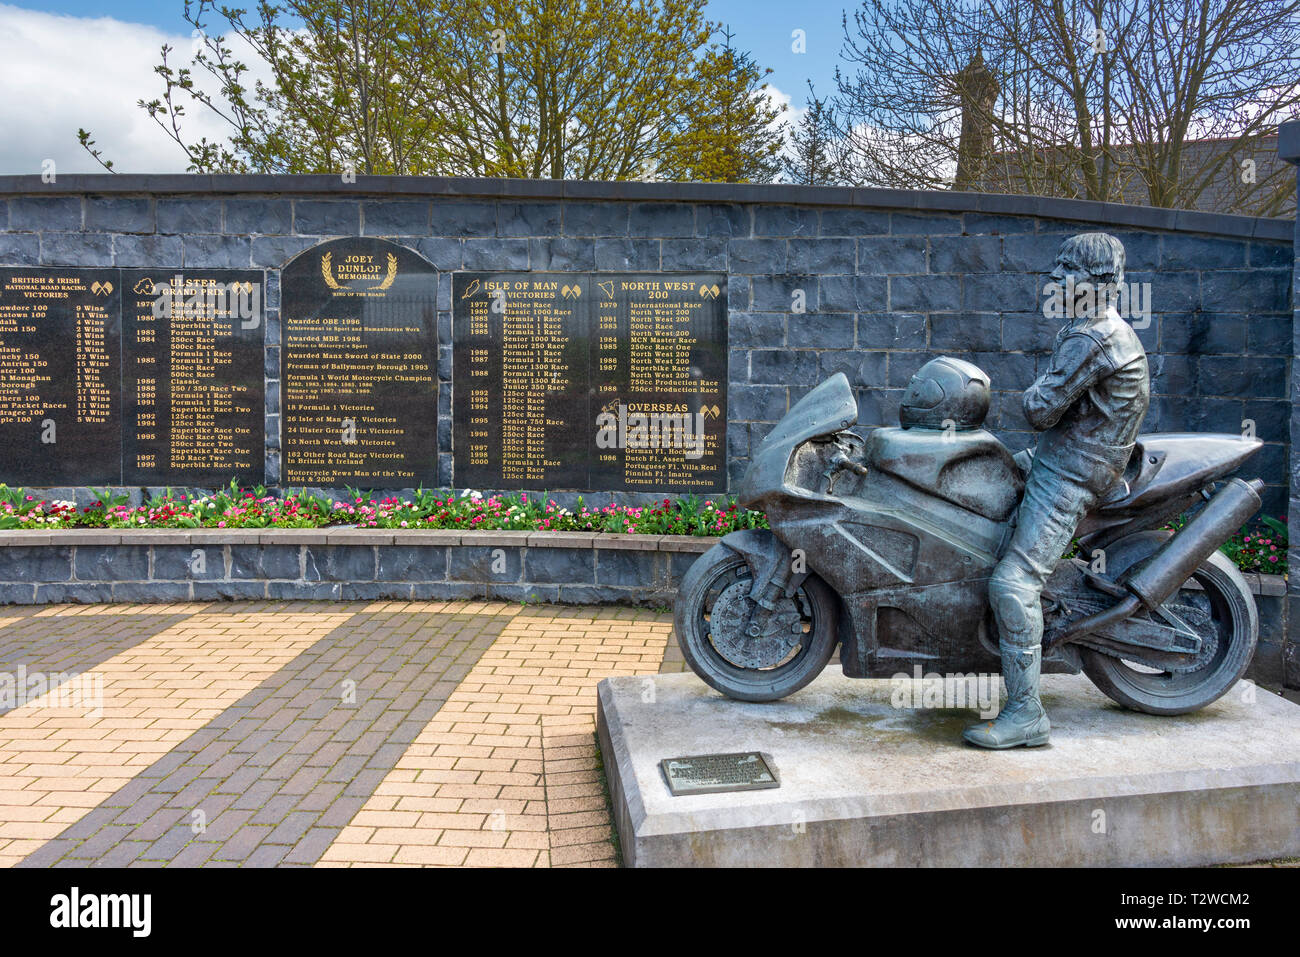 Joey Dunlop motorcycling champion racer statue in the Dunlop family memorial Garden in Ballymoney County Antrim, Northern Ireland Stock Photo